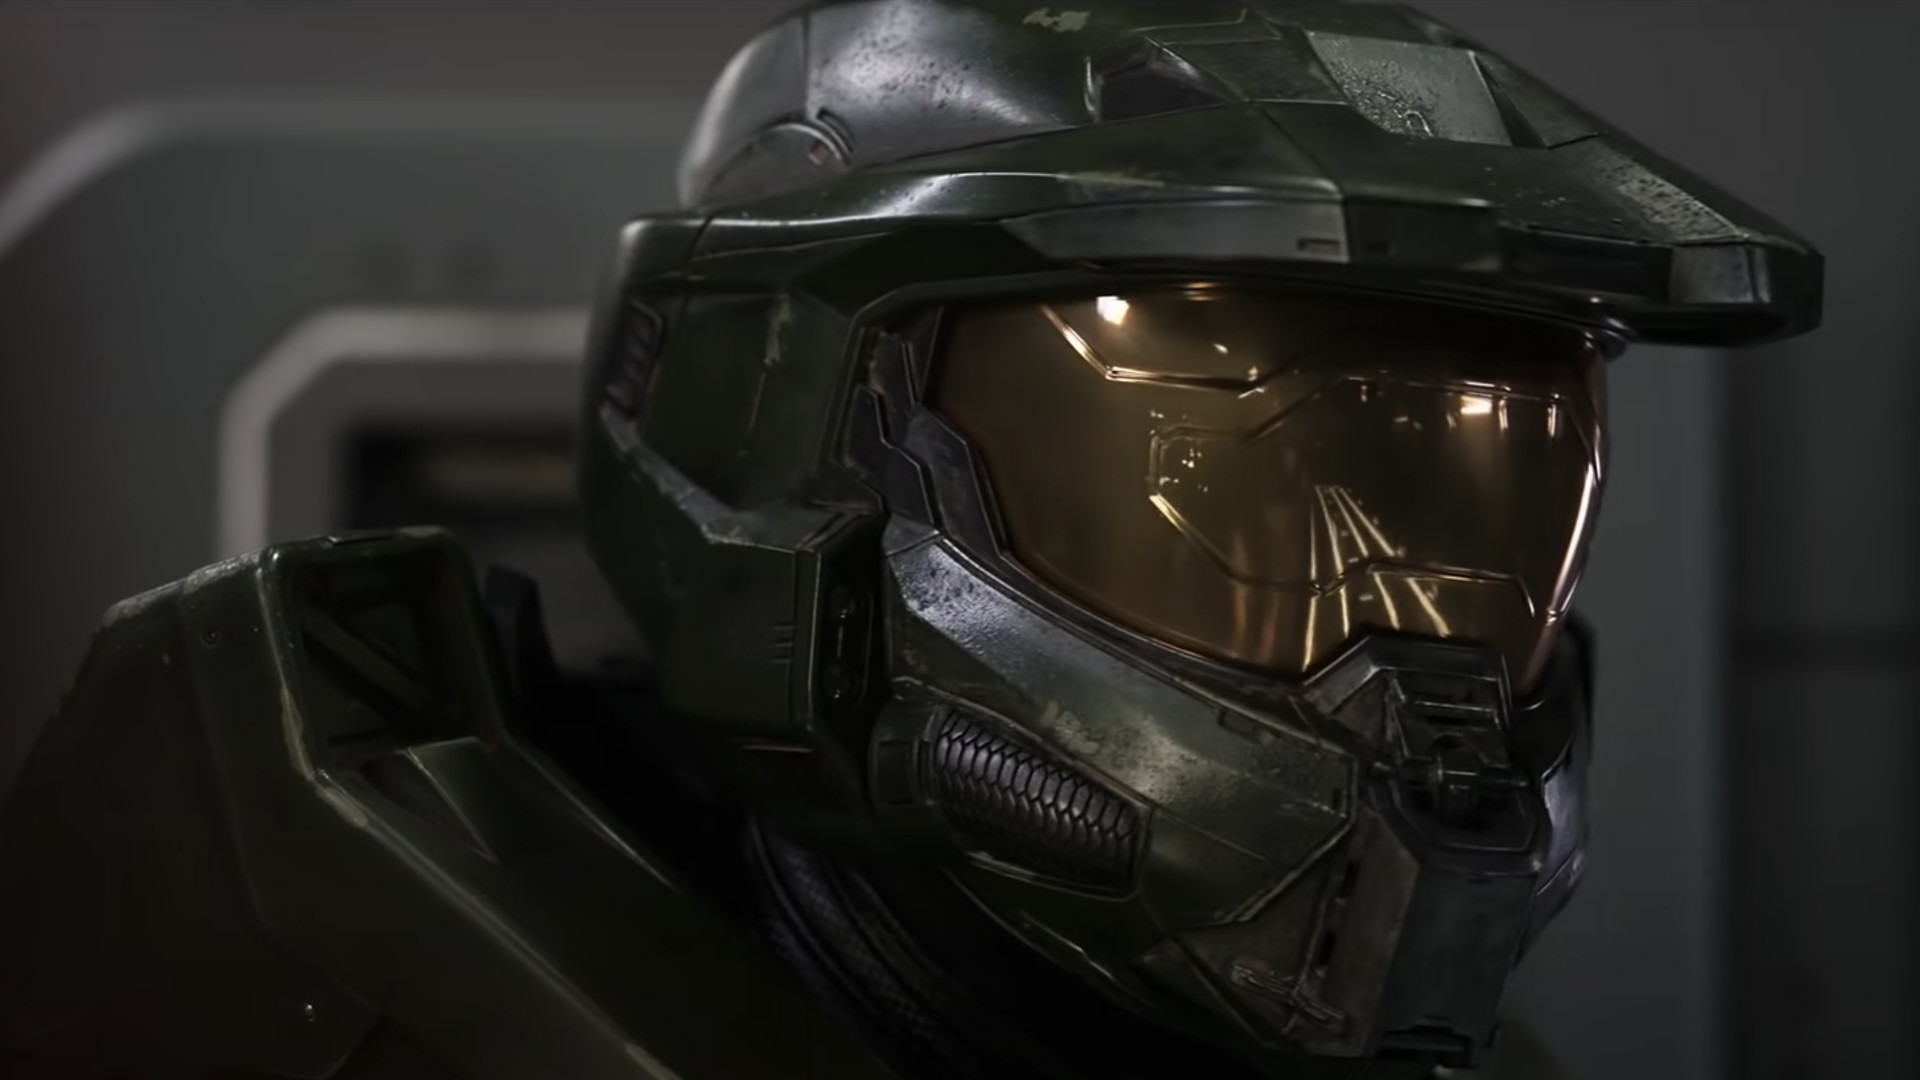 How to Watch 'Halo' TV Series for Free